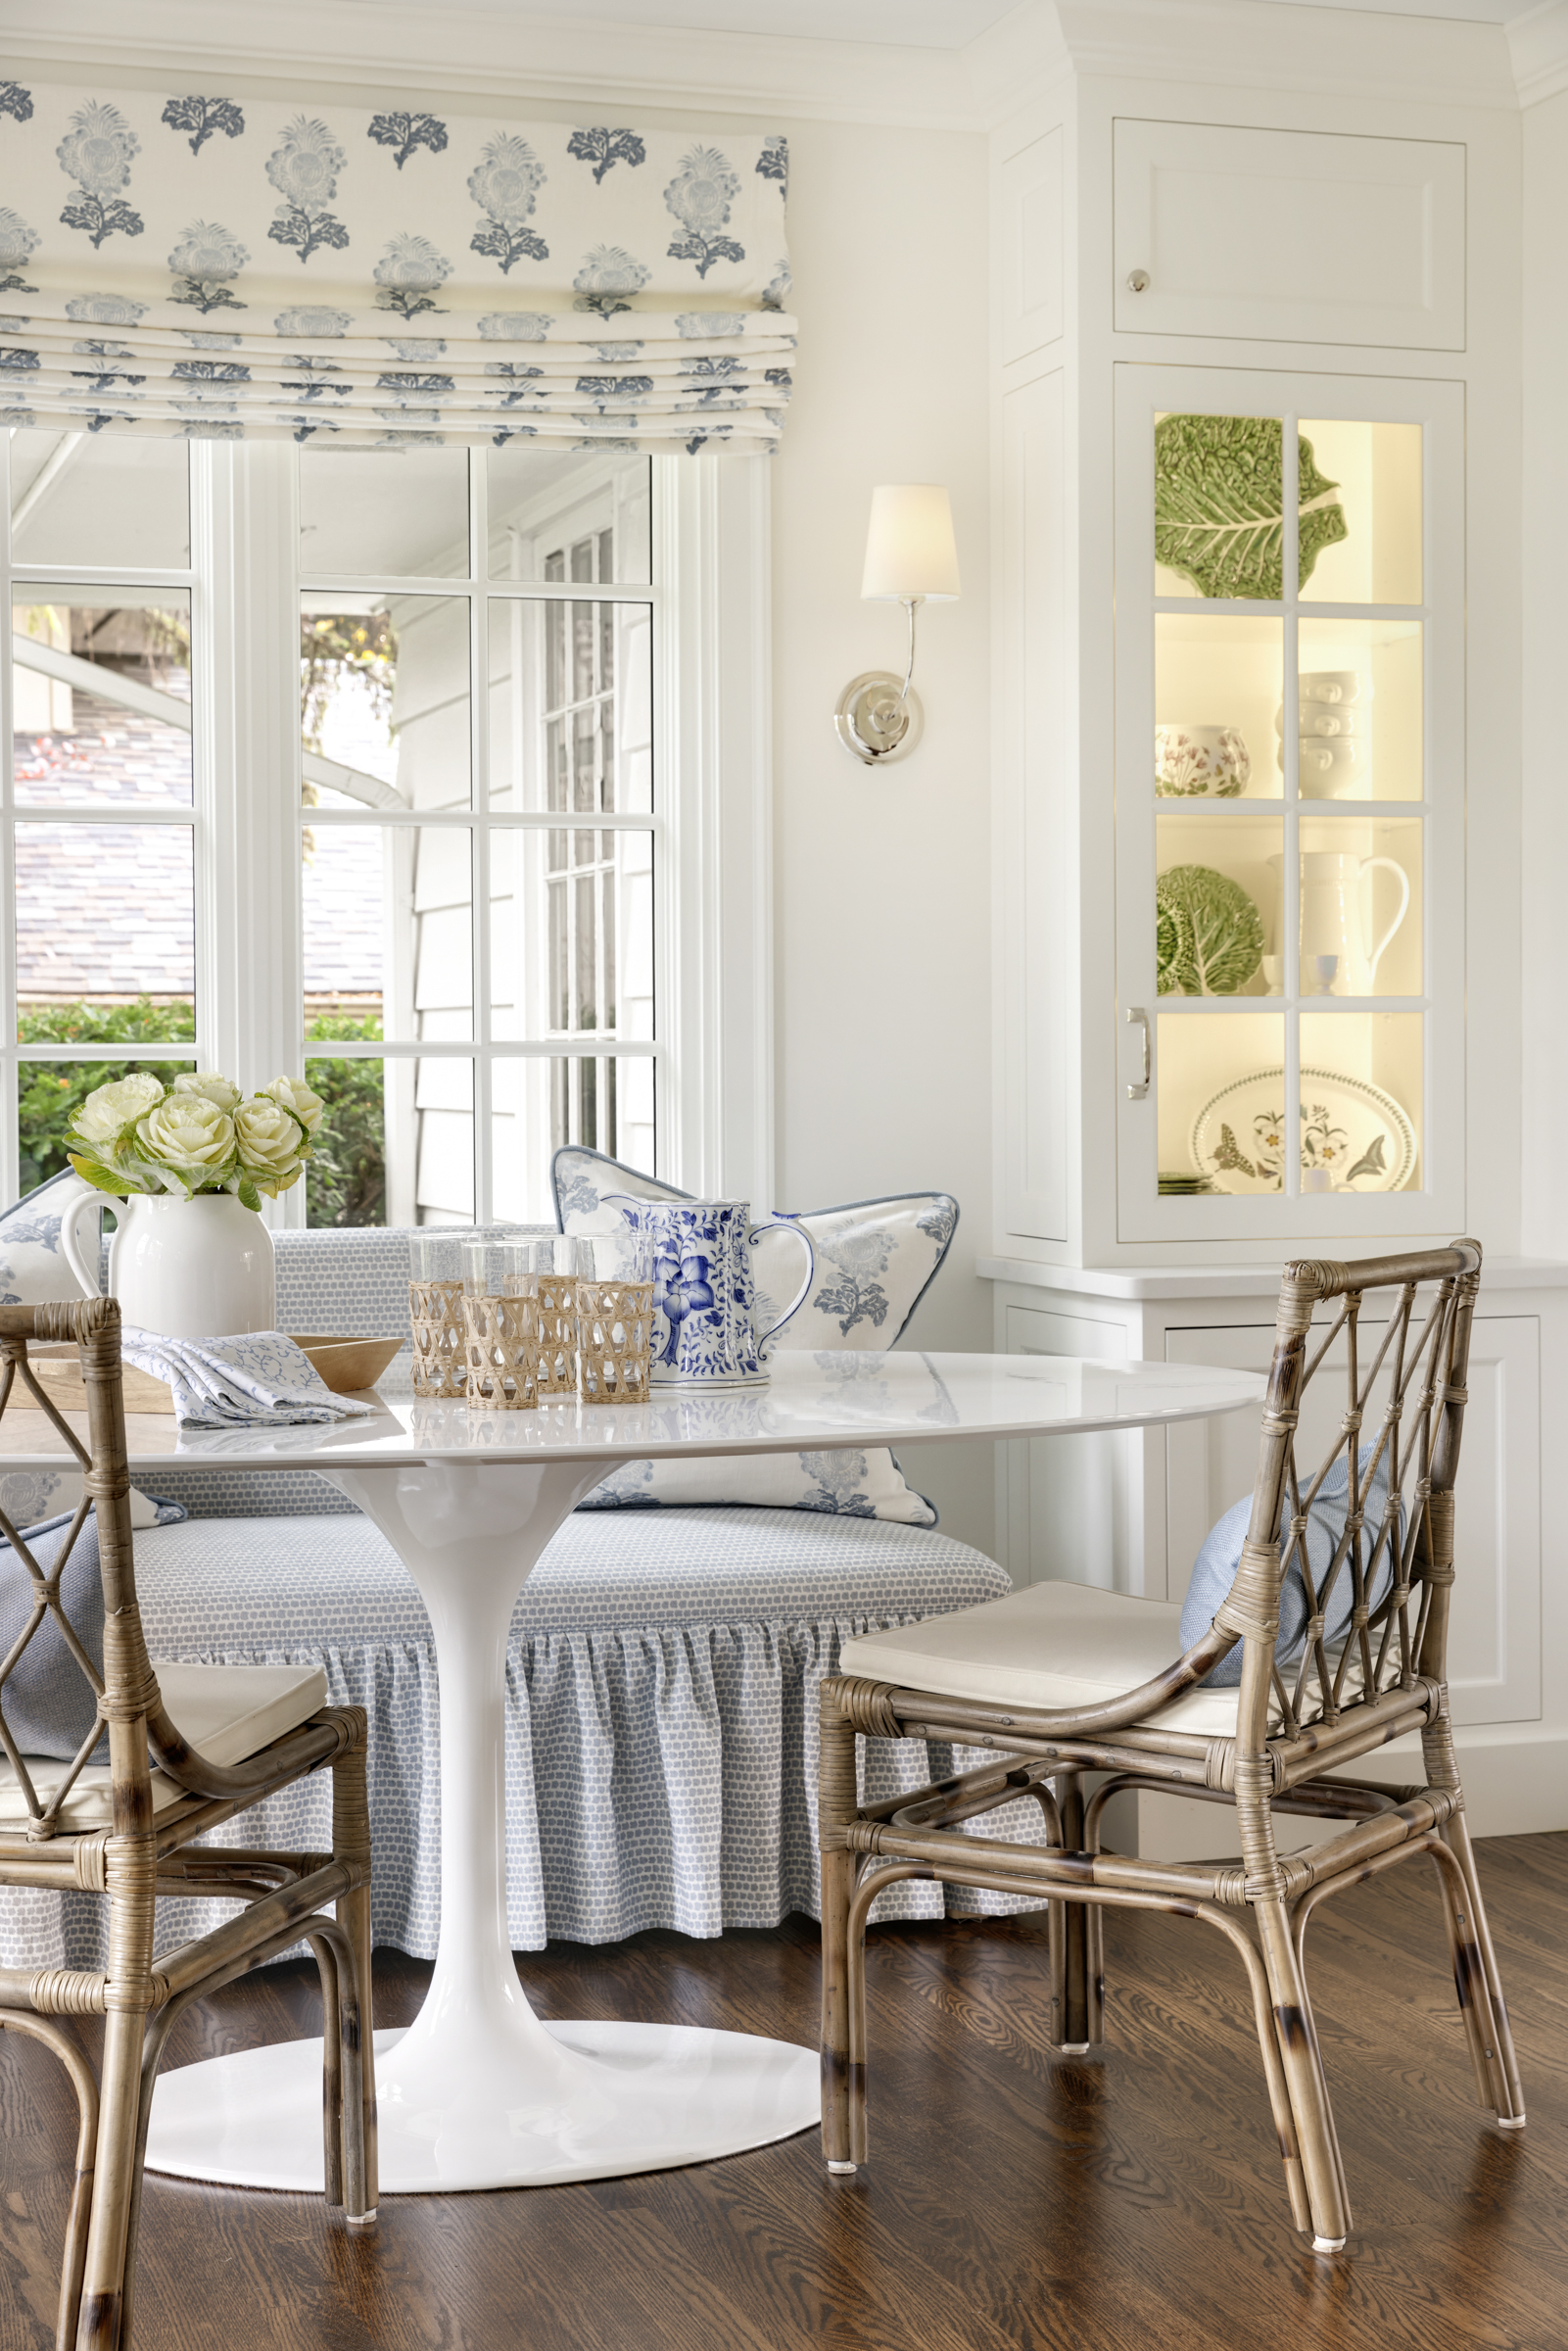 Charming kitchen remodel breakfast nook with booth seat under window and glass front storage